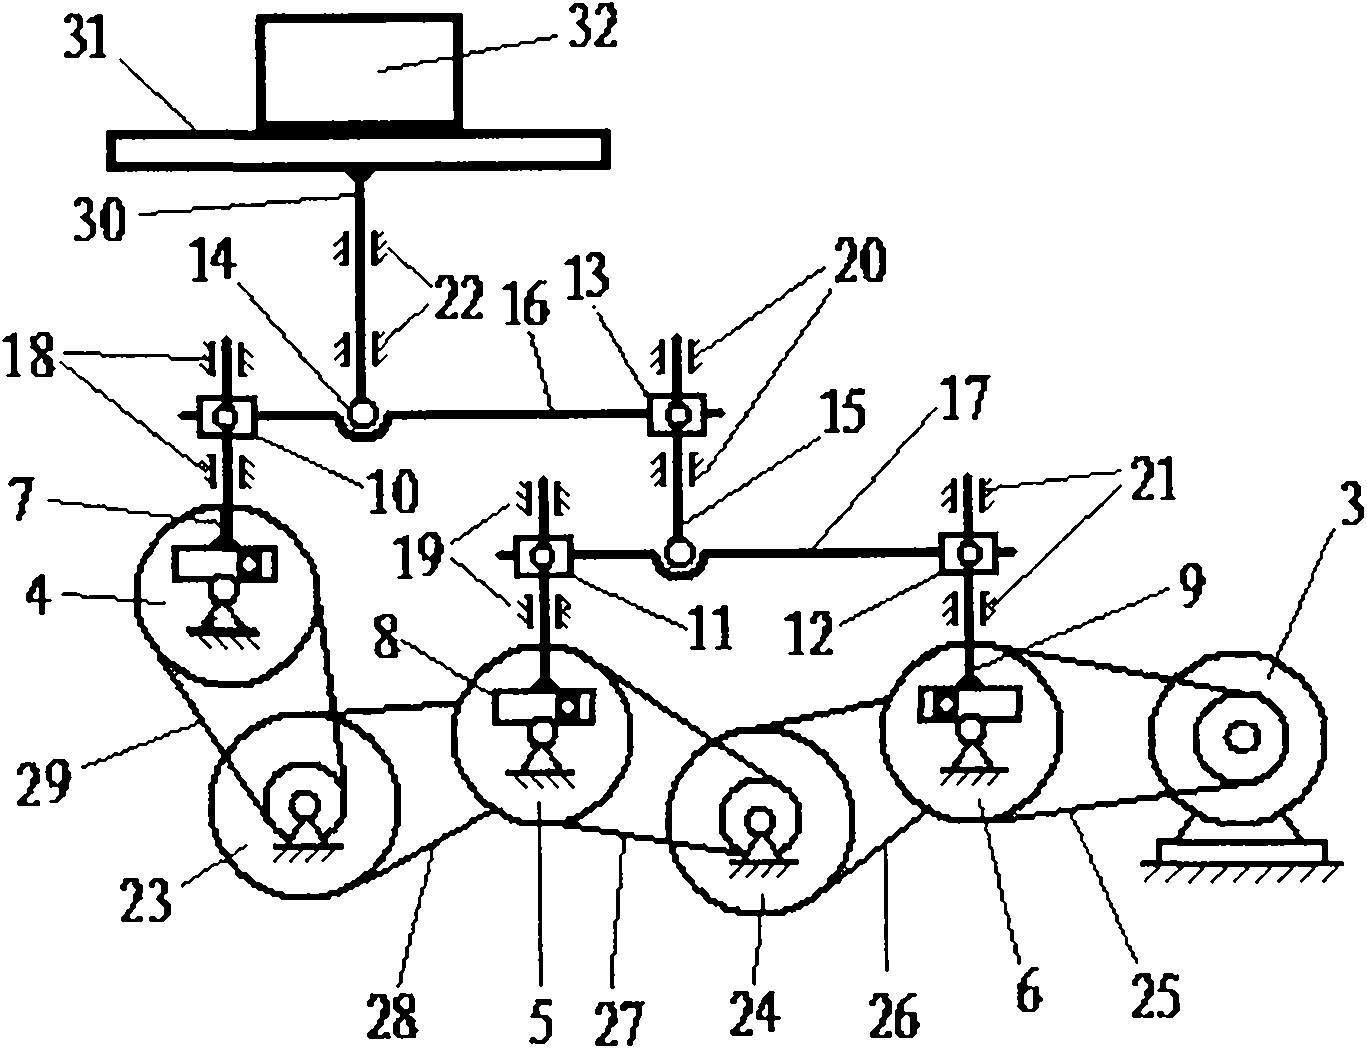 Multi-frequency synthesized vibration test device